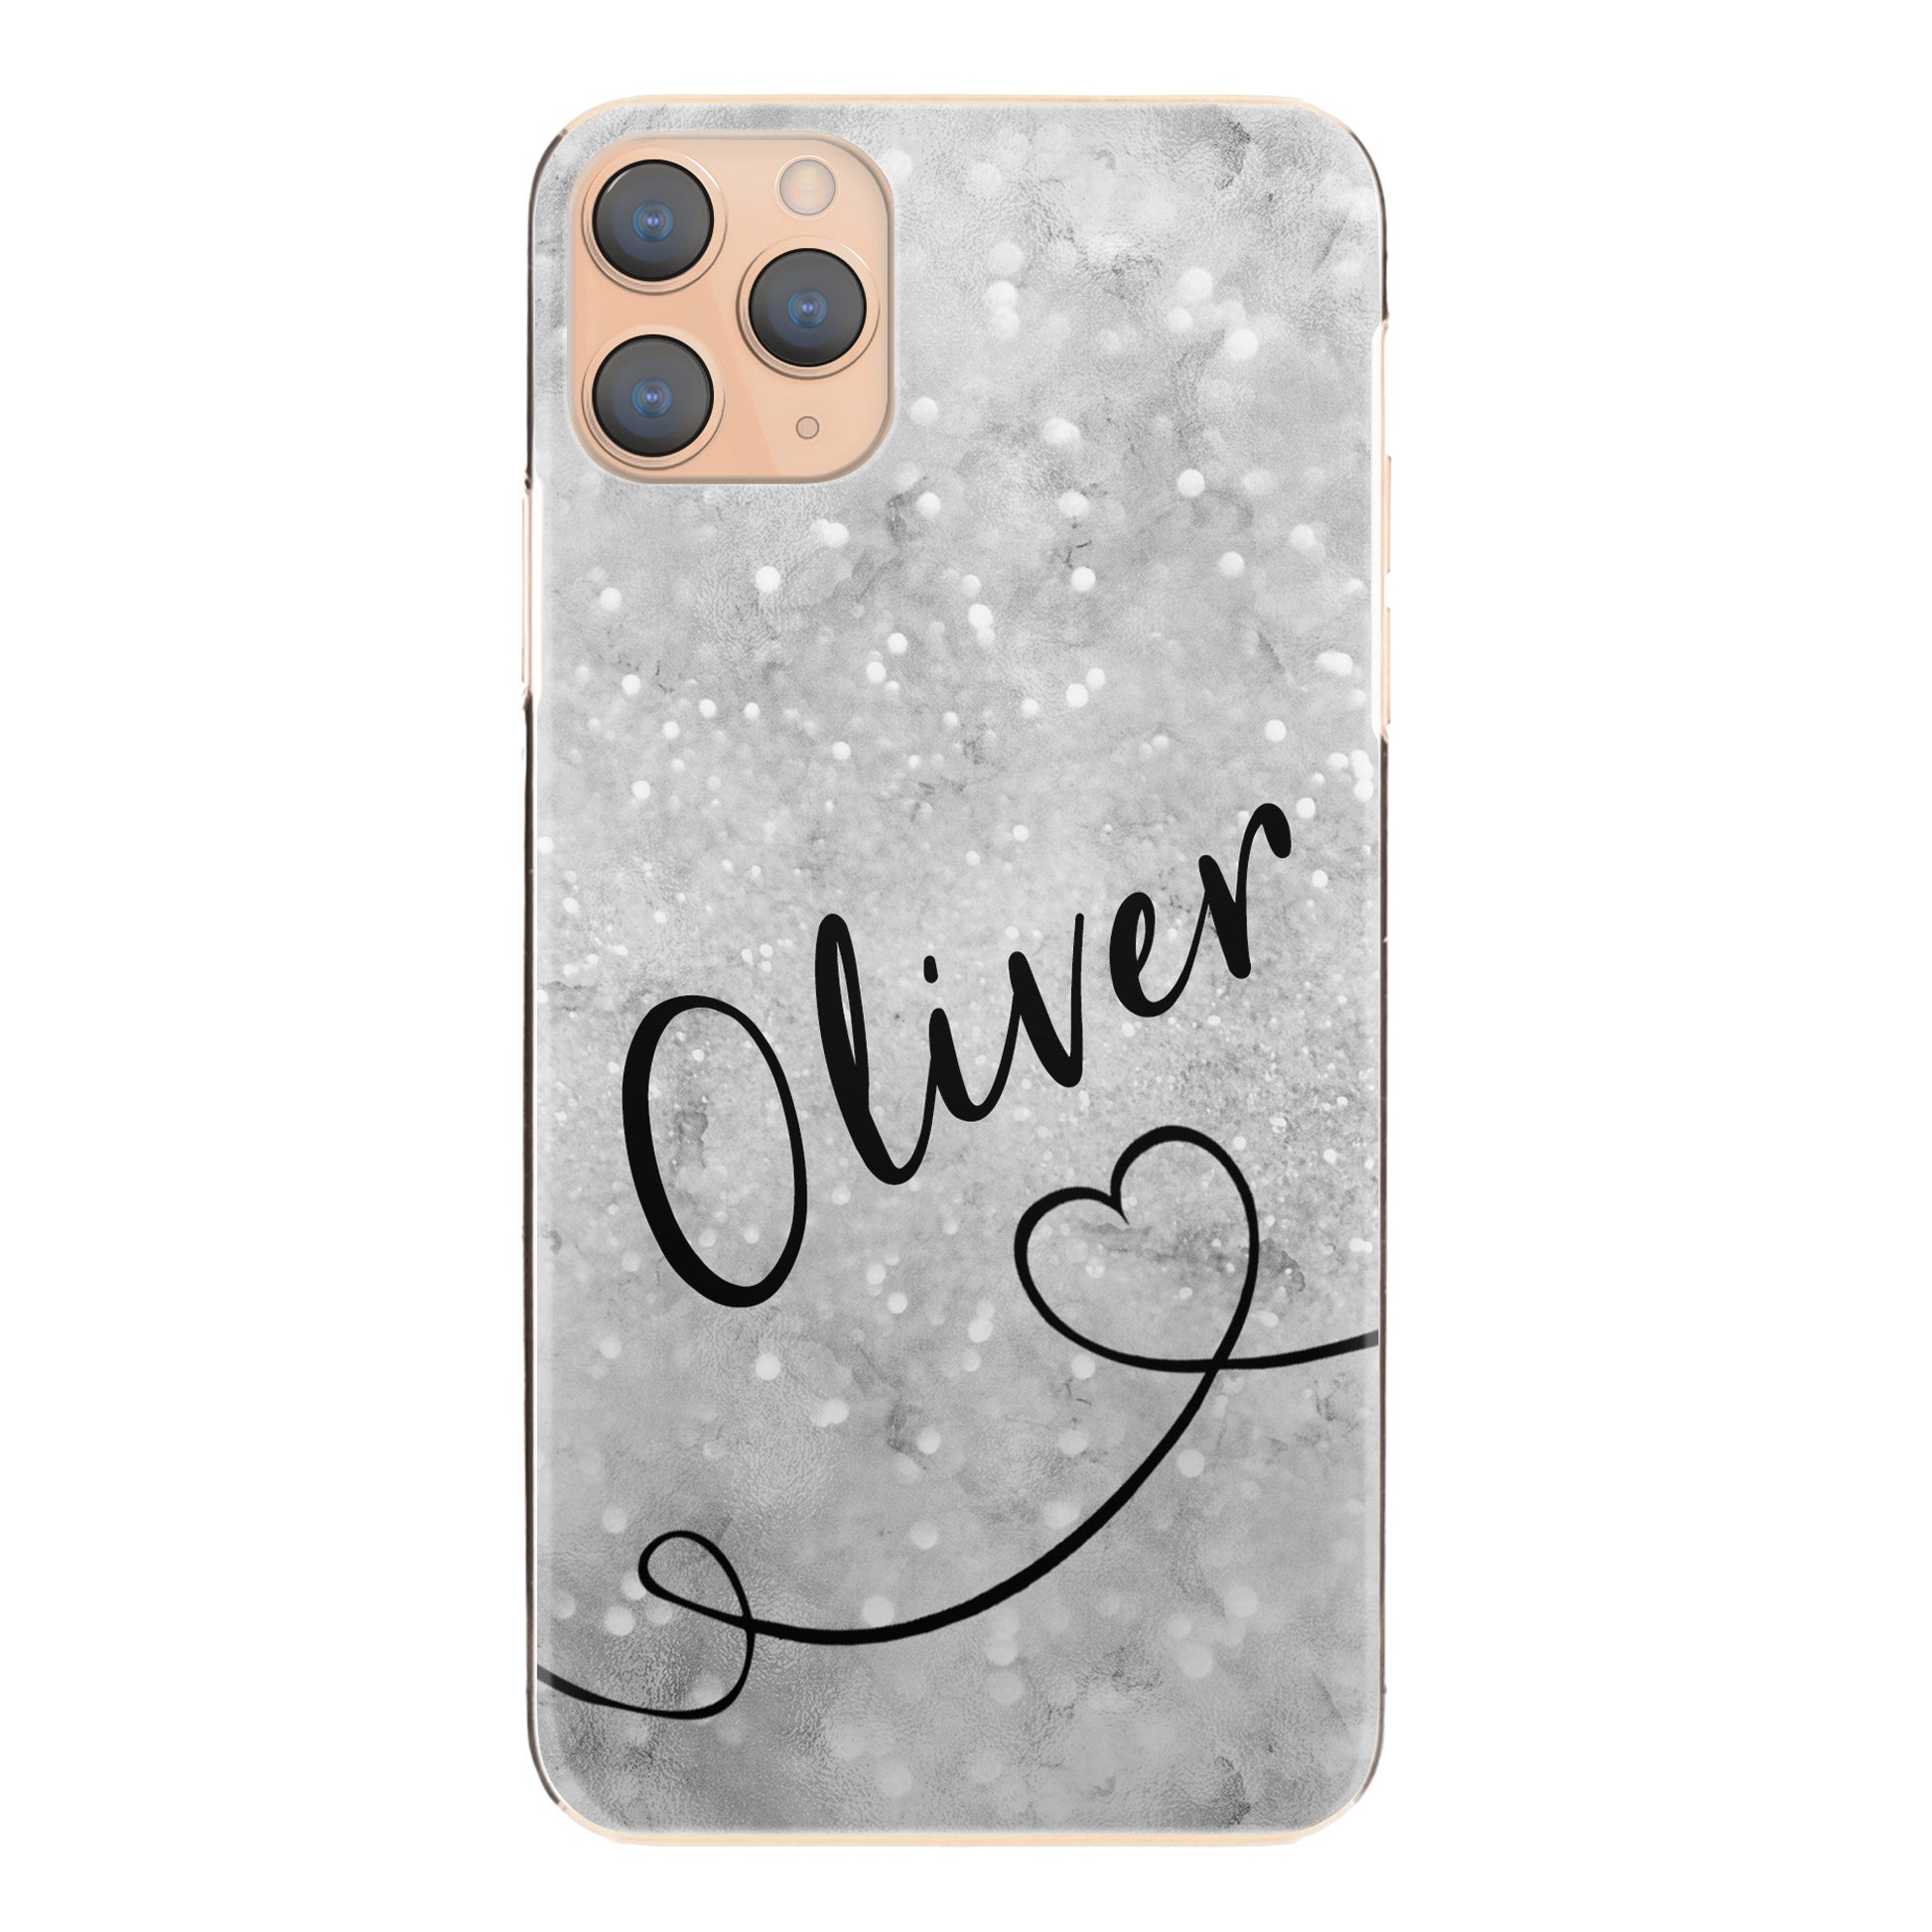 Personalised Honor Phone Hard Case with Stylish Text and Heart Line on Textured Grey